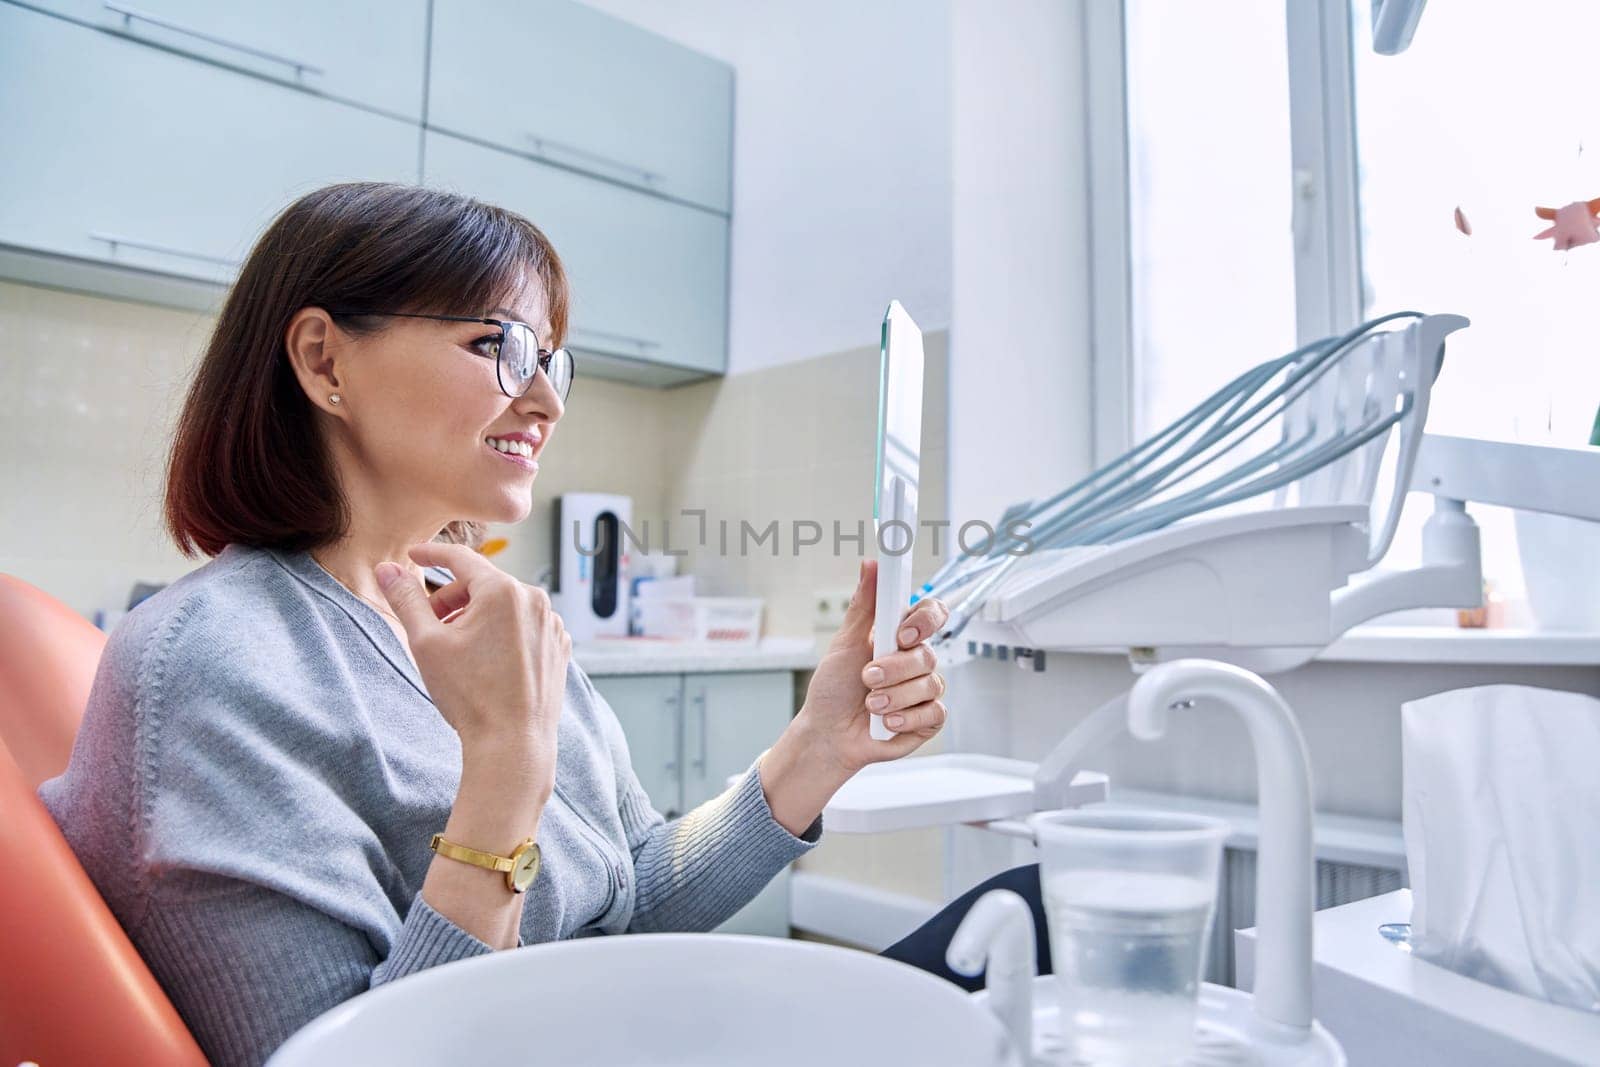 Smiling middle aged woman in dental chair in dentist's office with mirror looking at her teeth. Treatment, therapy, dental care, prosthetics, dentistry concept